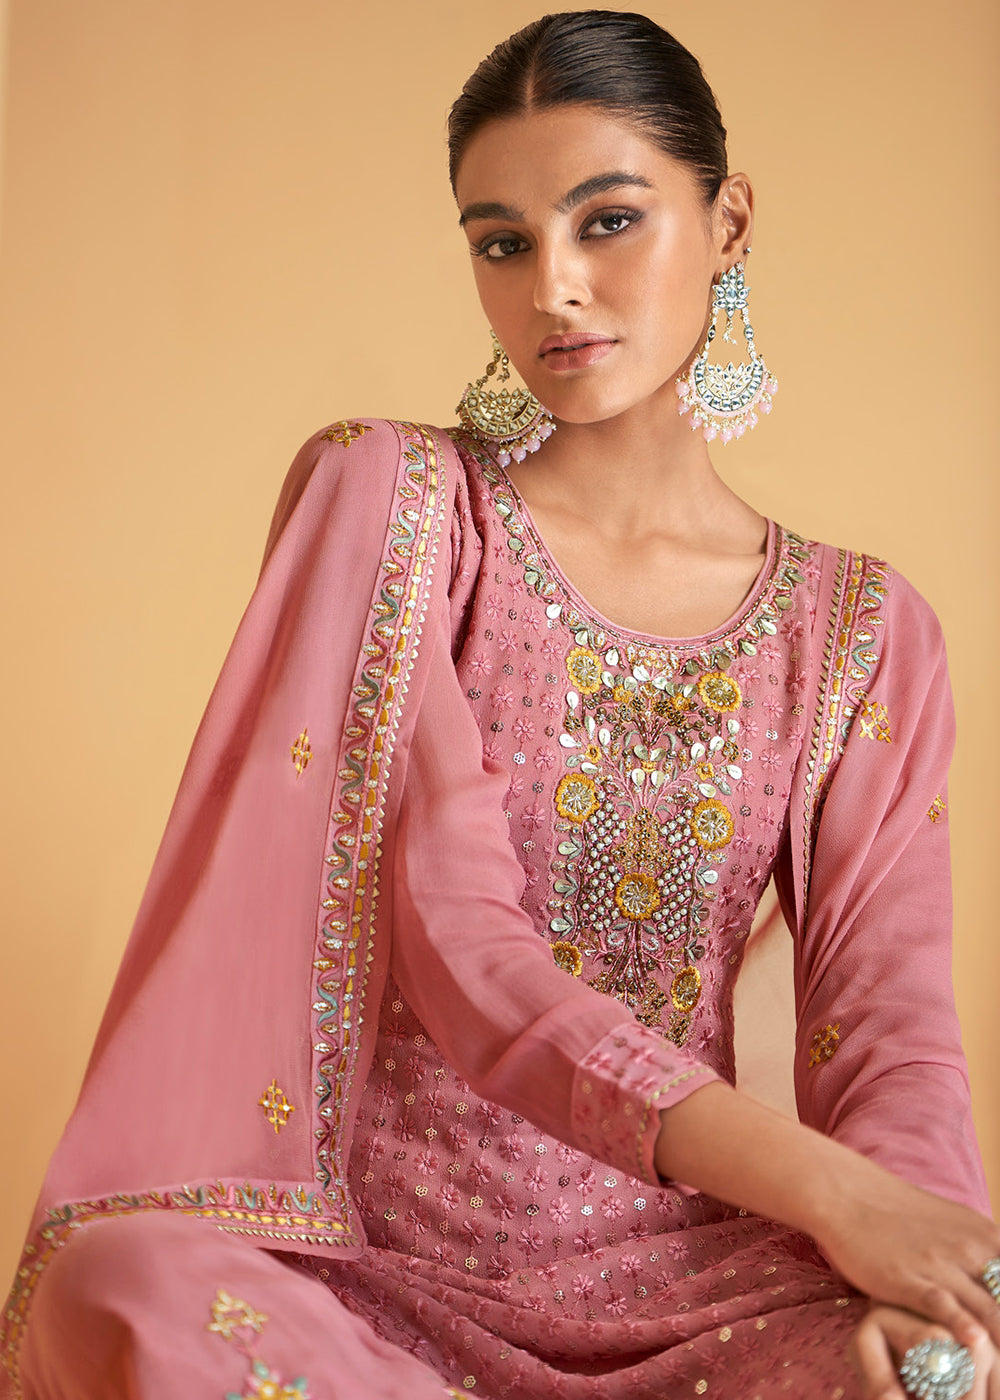 Buy Now Festive Look Pink Floral Embroidered Palazzo Style Suit Online in USA, UK, Canada, Germany, Australia & Worldwide at Empress Clothing.